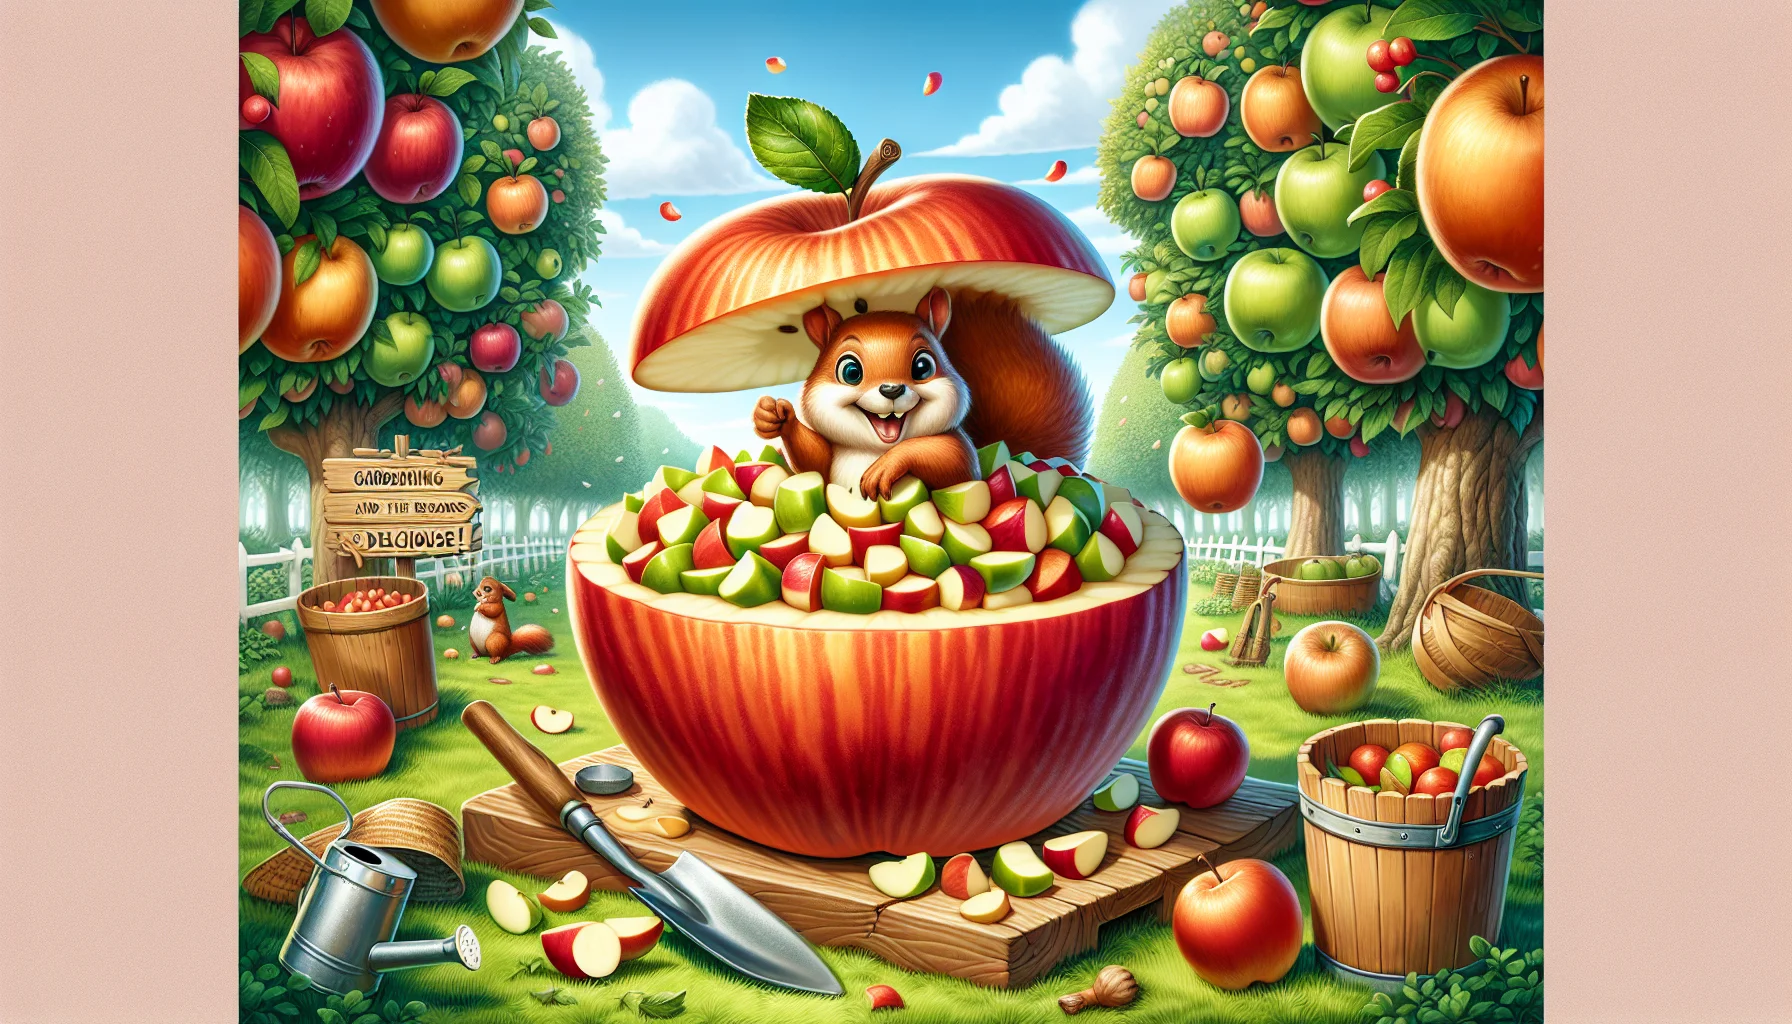 Generate a humorous and engaging scene of apple fruit salad. The image depicts an orchard scene with different varieties of apple trees, bearing rich, colorful fruits. A mischievous squirrel playfully tosses a core into a giant carved out apple acting as a bowl, filled with fresh, juicy diced apples - a visual representation of a delightful apple fruit salad. A few gardening tools like a spade, watering can and a straw hat suggestively lie nearby, highlighting the joy of gardening. A signboard reads, 'Gardening is fun, and the rewards are delicious!' All under a bright sunny day, enticing everyone to participate and enjoy gardening.